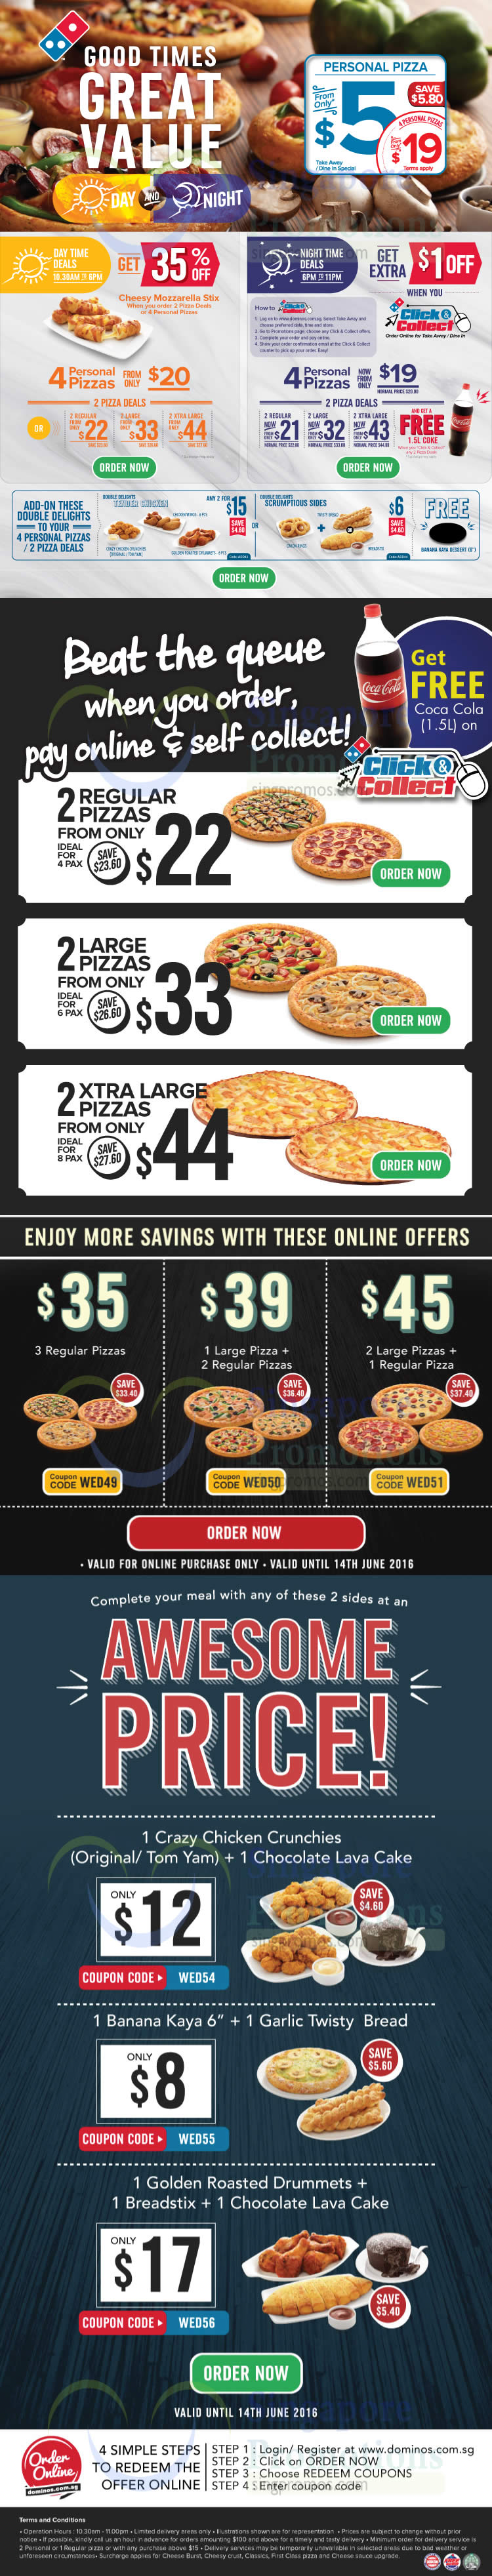 dominos pizza coupons december 2015